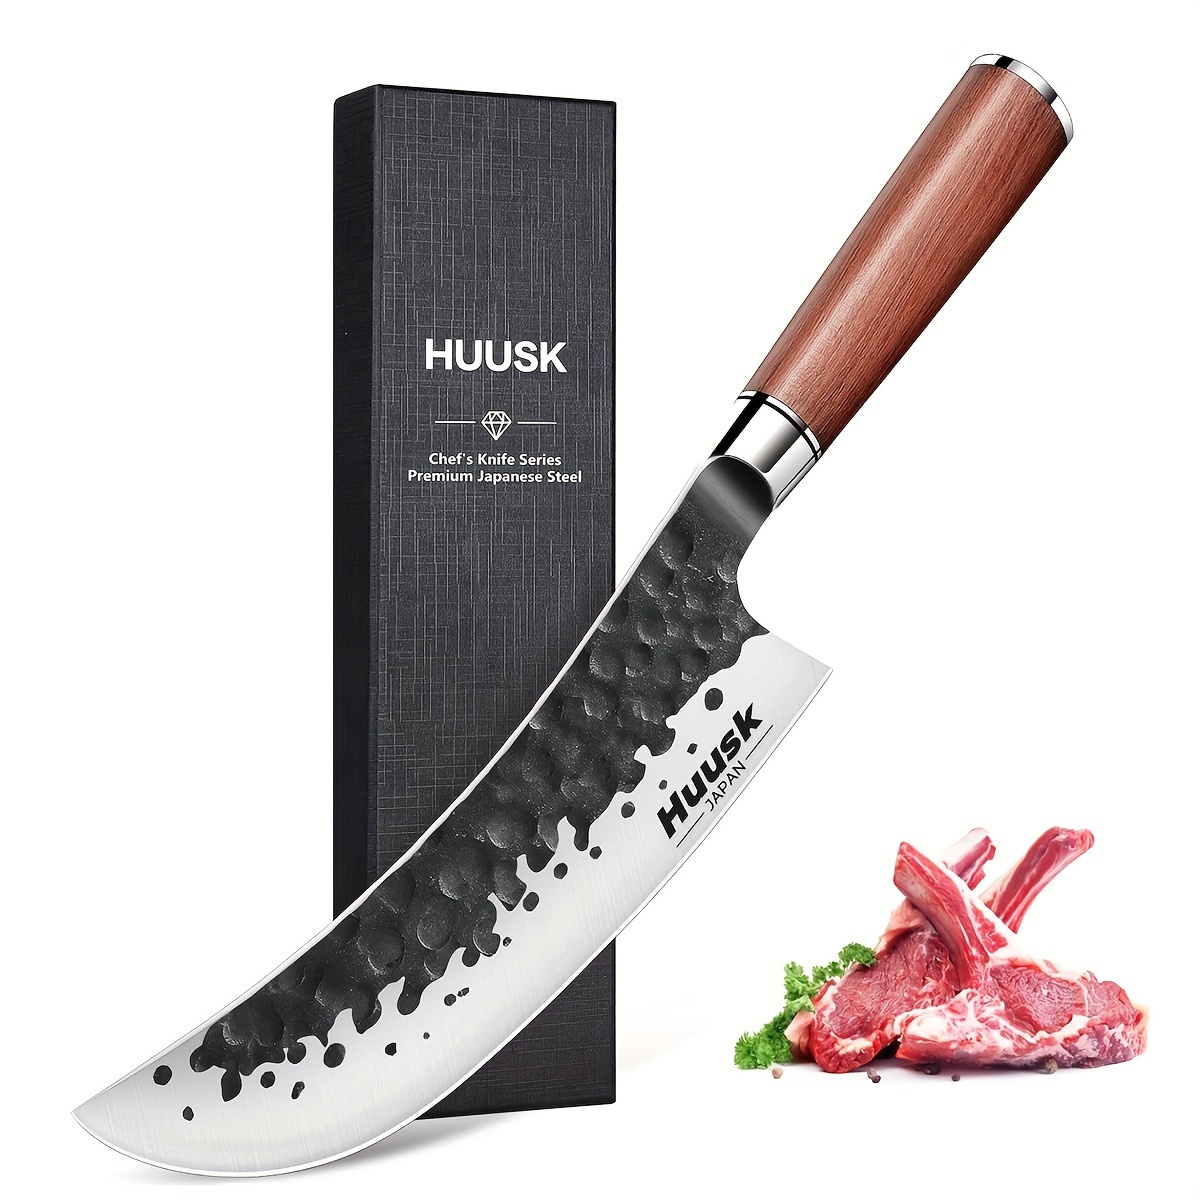 

Knives From Japan, Butcher Knife For Meat Cutting Hand Forged 8" Meat Cleaver Knife High Carbon Steel Chopping Knife Ultra Sharp With Ergonomic Handle & Gift Box